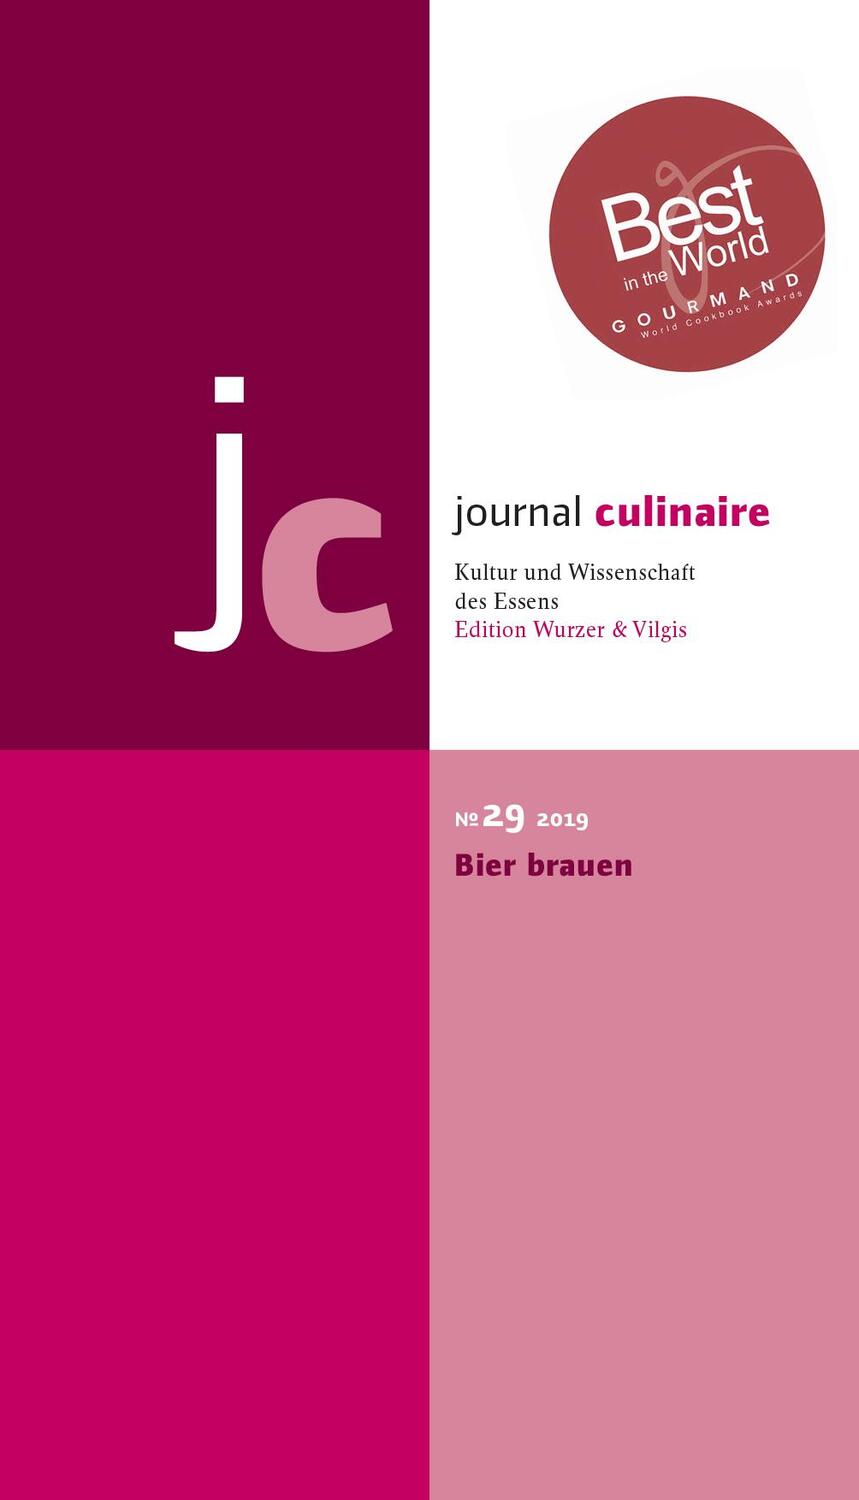 Cover: 9783941121294 | journal culinaire No. 29: Bier brauen/ "Best in the World" Gourmand...